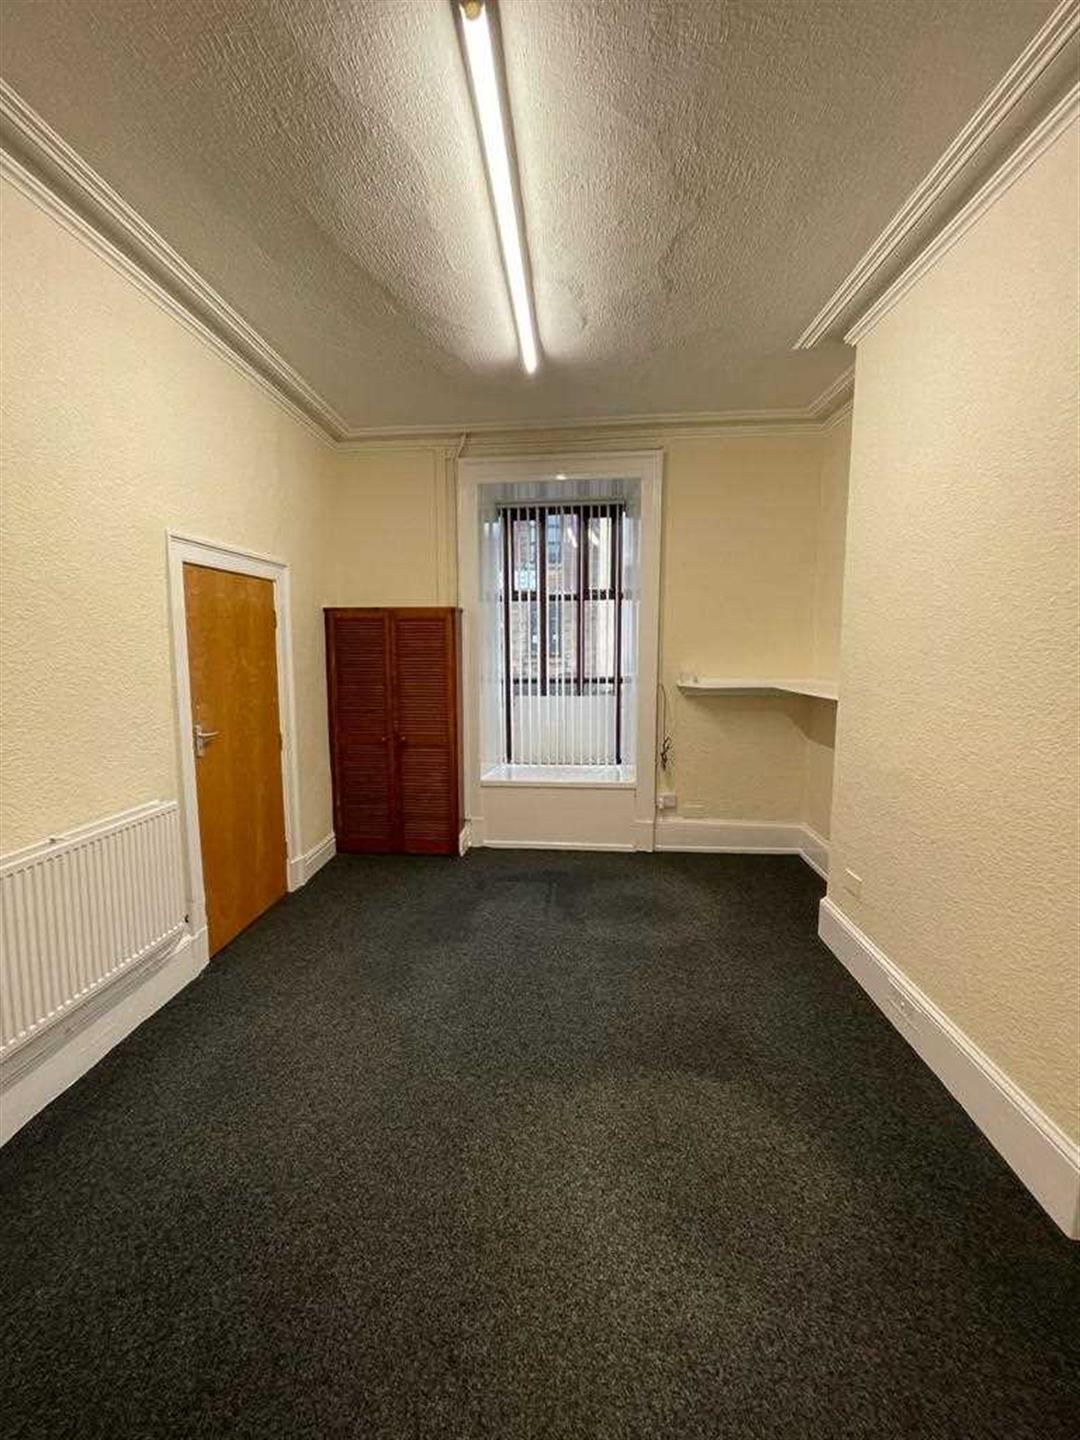 Commercial Property To Rent - Image 3